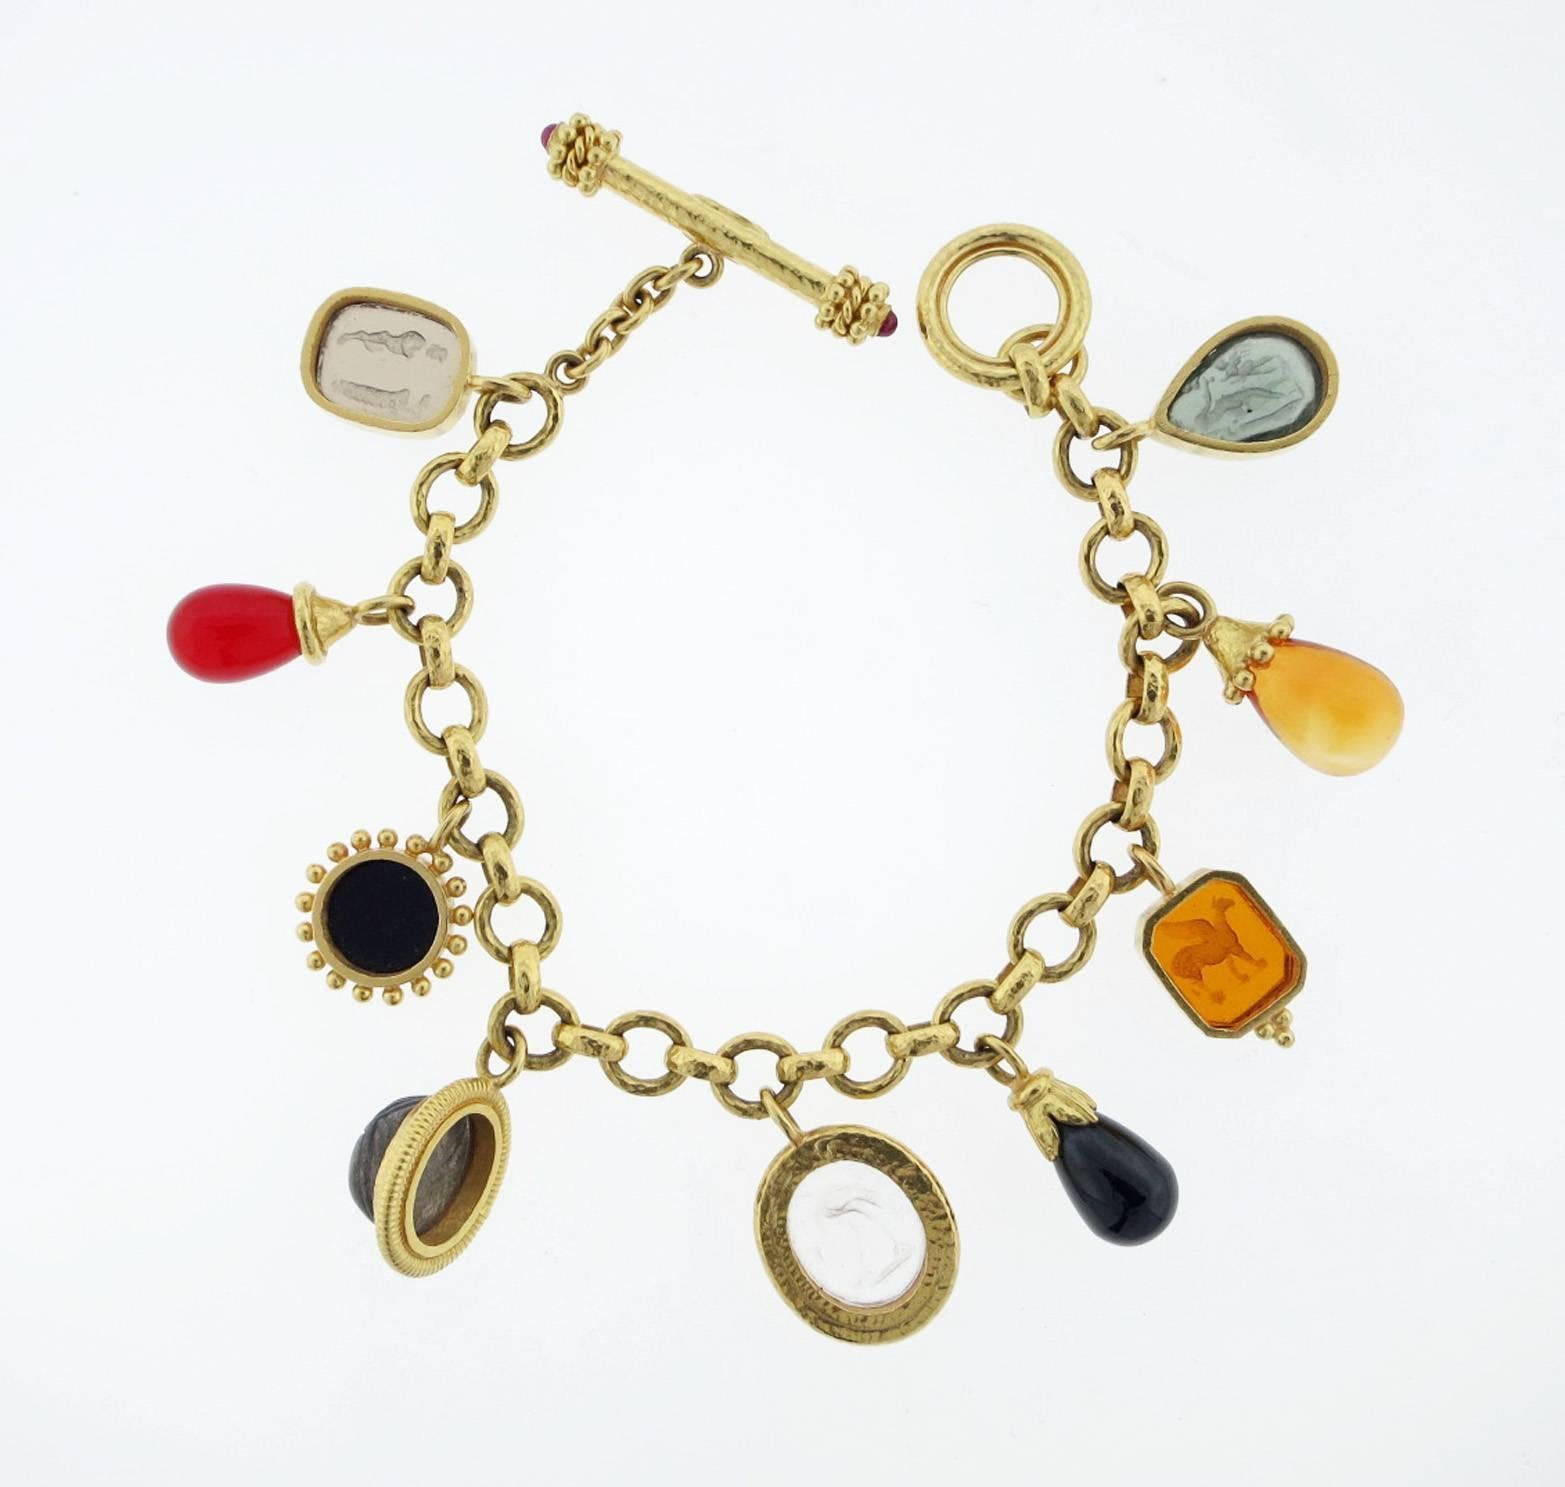 Impressive 18kt. yellow gold link charm bracelet made by Elizabeth Locke consisting of various Venetian intaglios and semi-precious stones .
The bracelet measures 8 1/2 inches in length with a toggle catch. The bracelet weighs 56.9 gr. Excellent